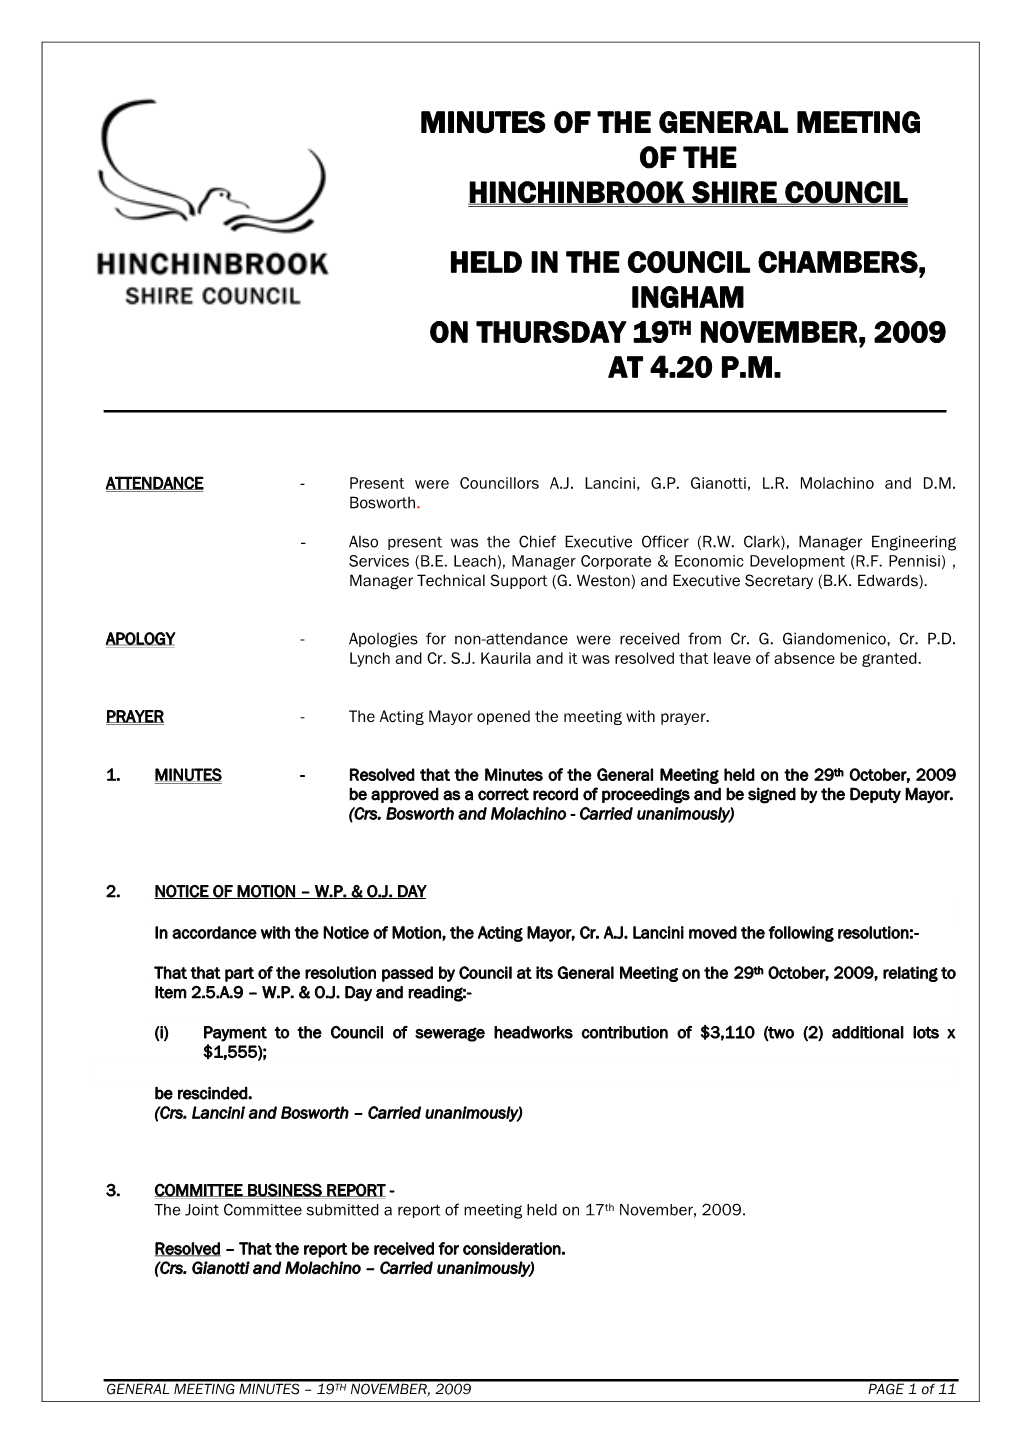 Minutes of the General Meeting of the Hinchinbrook Shire Council